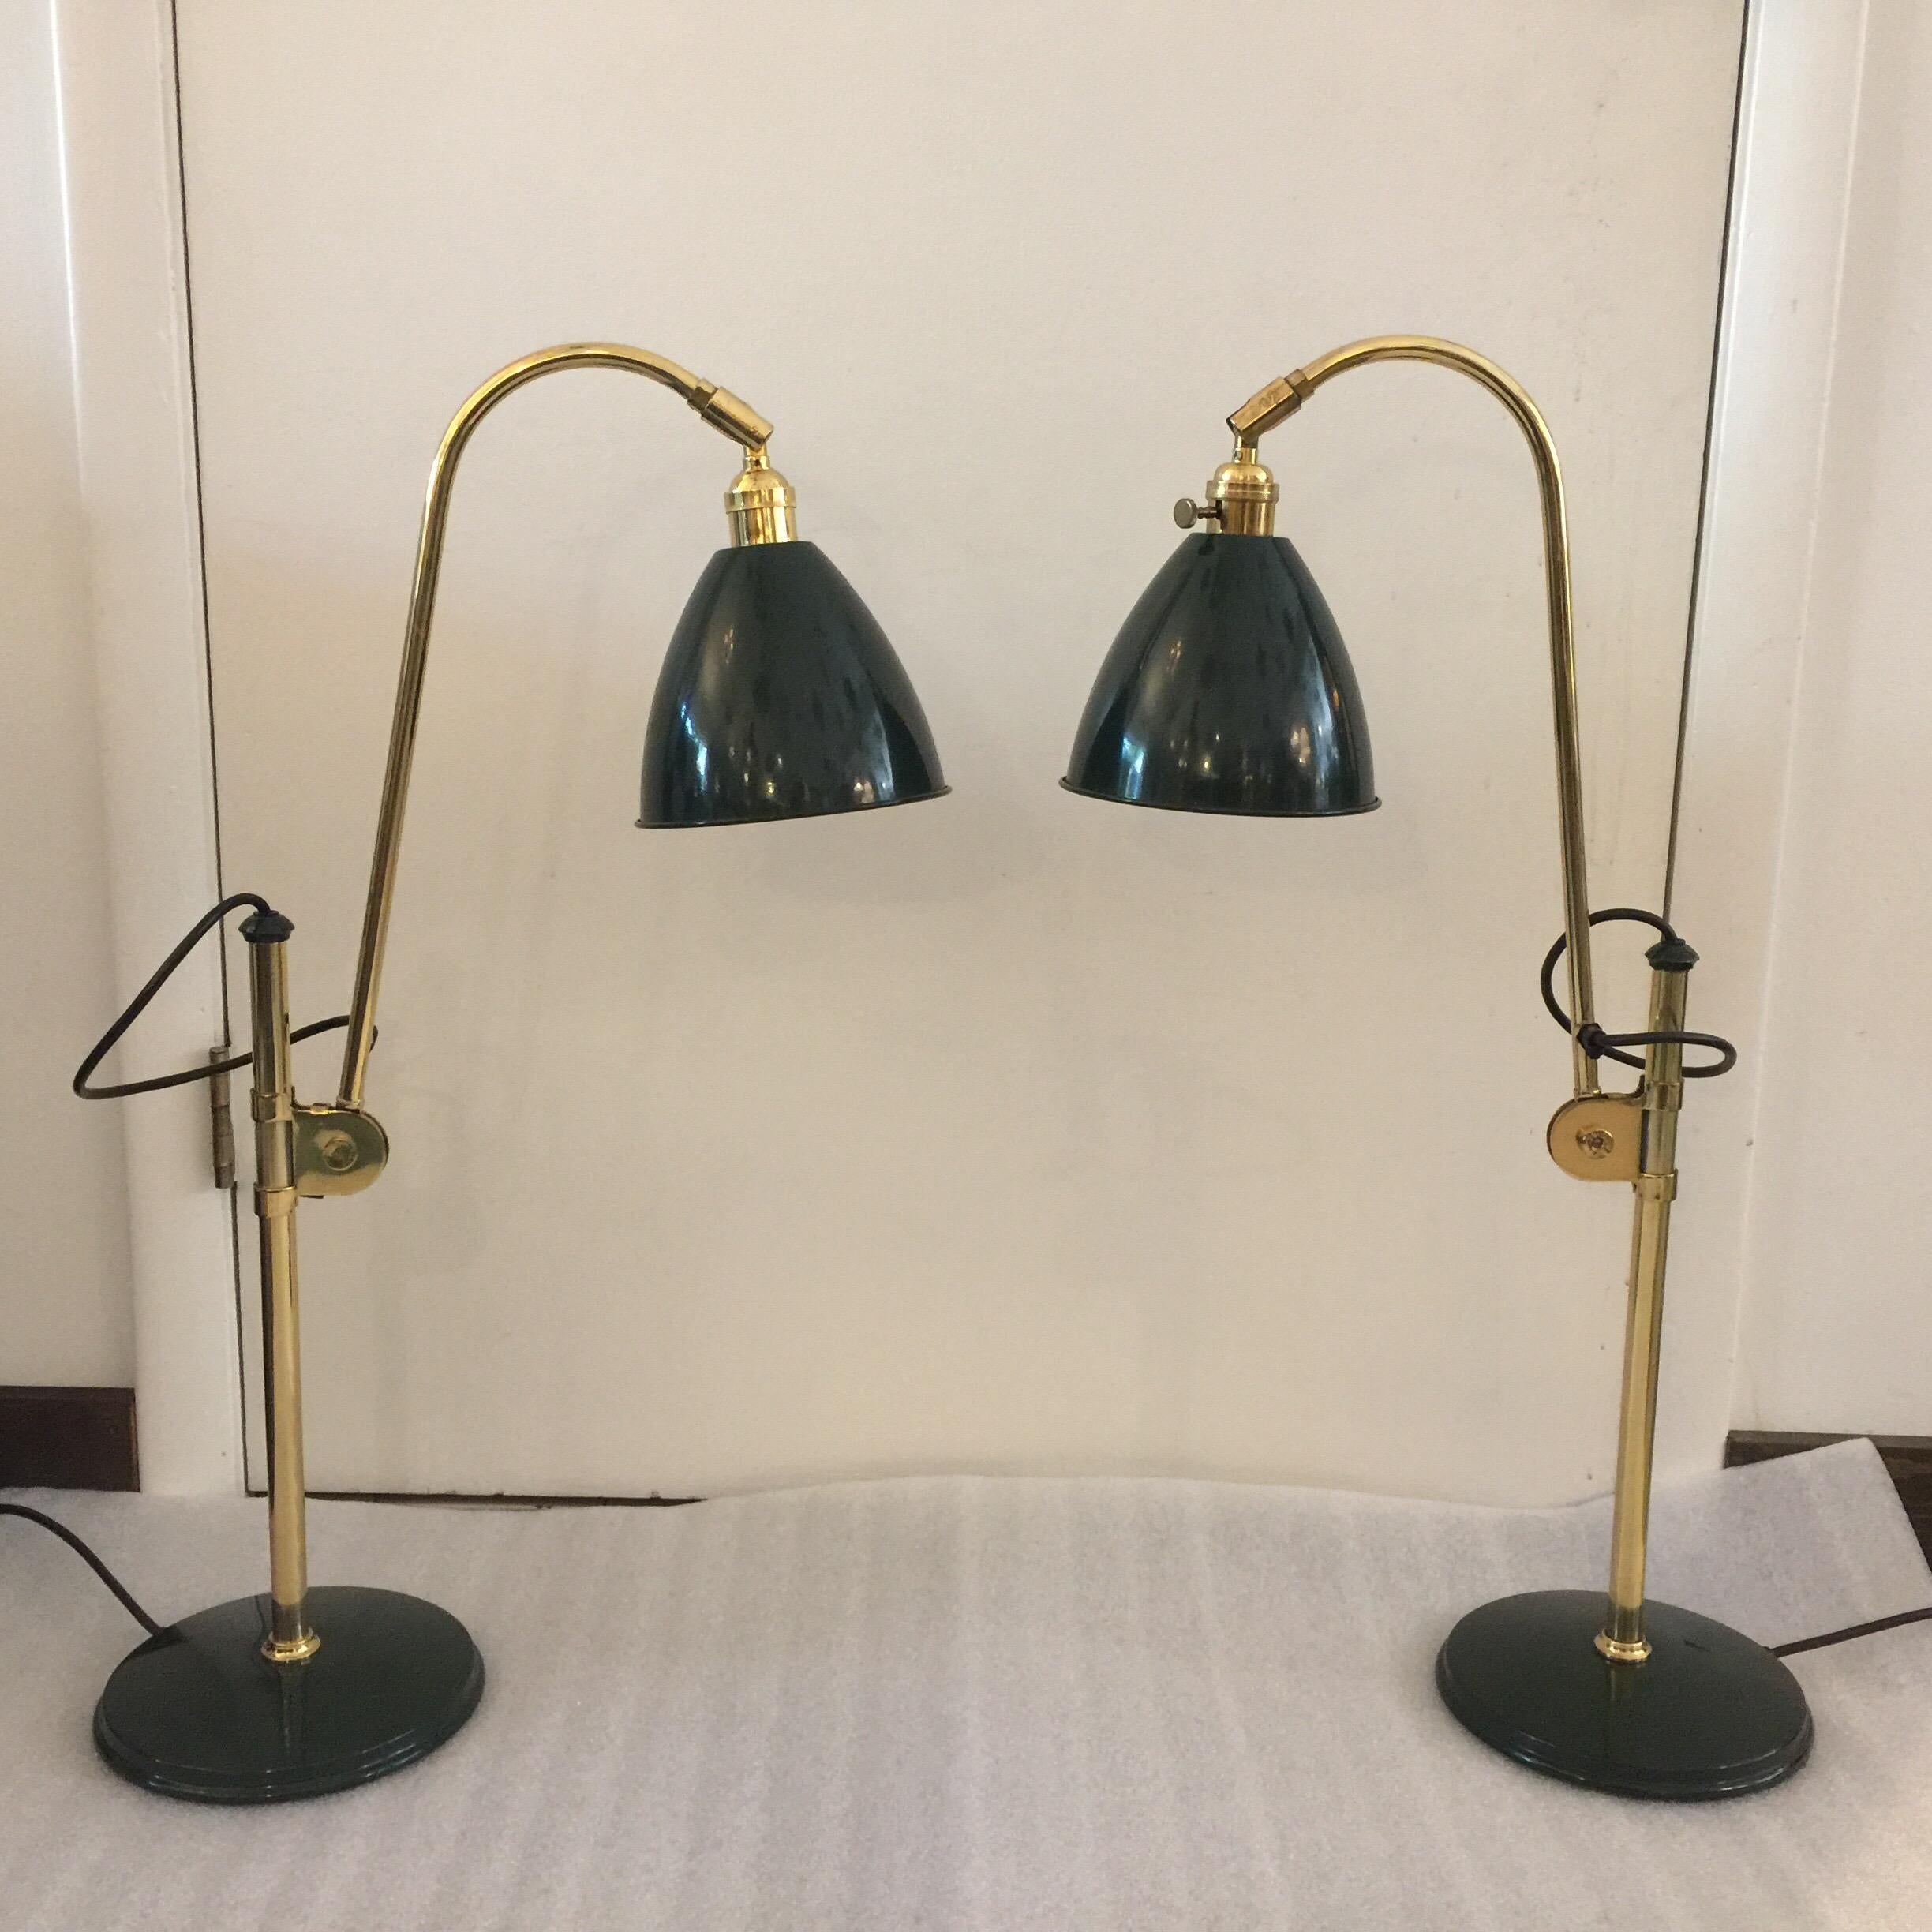 English Green Gooseneck Adjustable Table Lamps by OMI 1